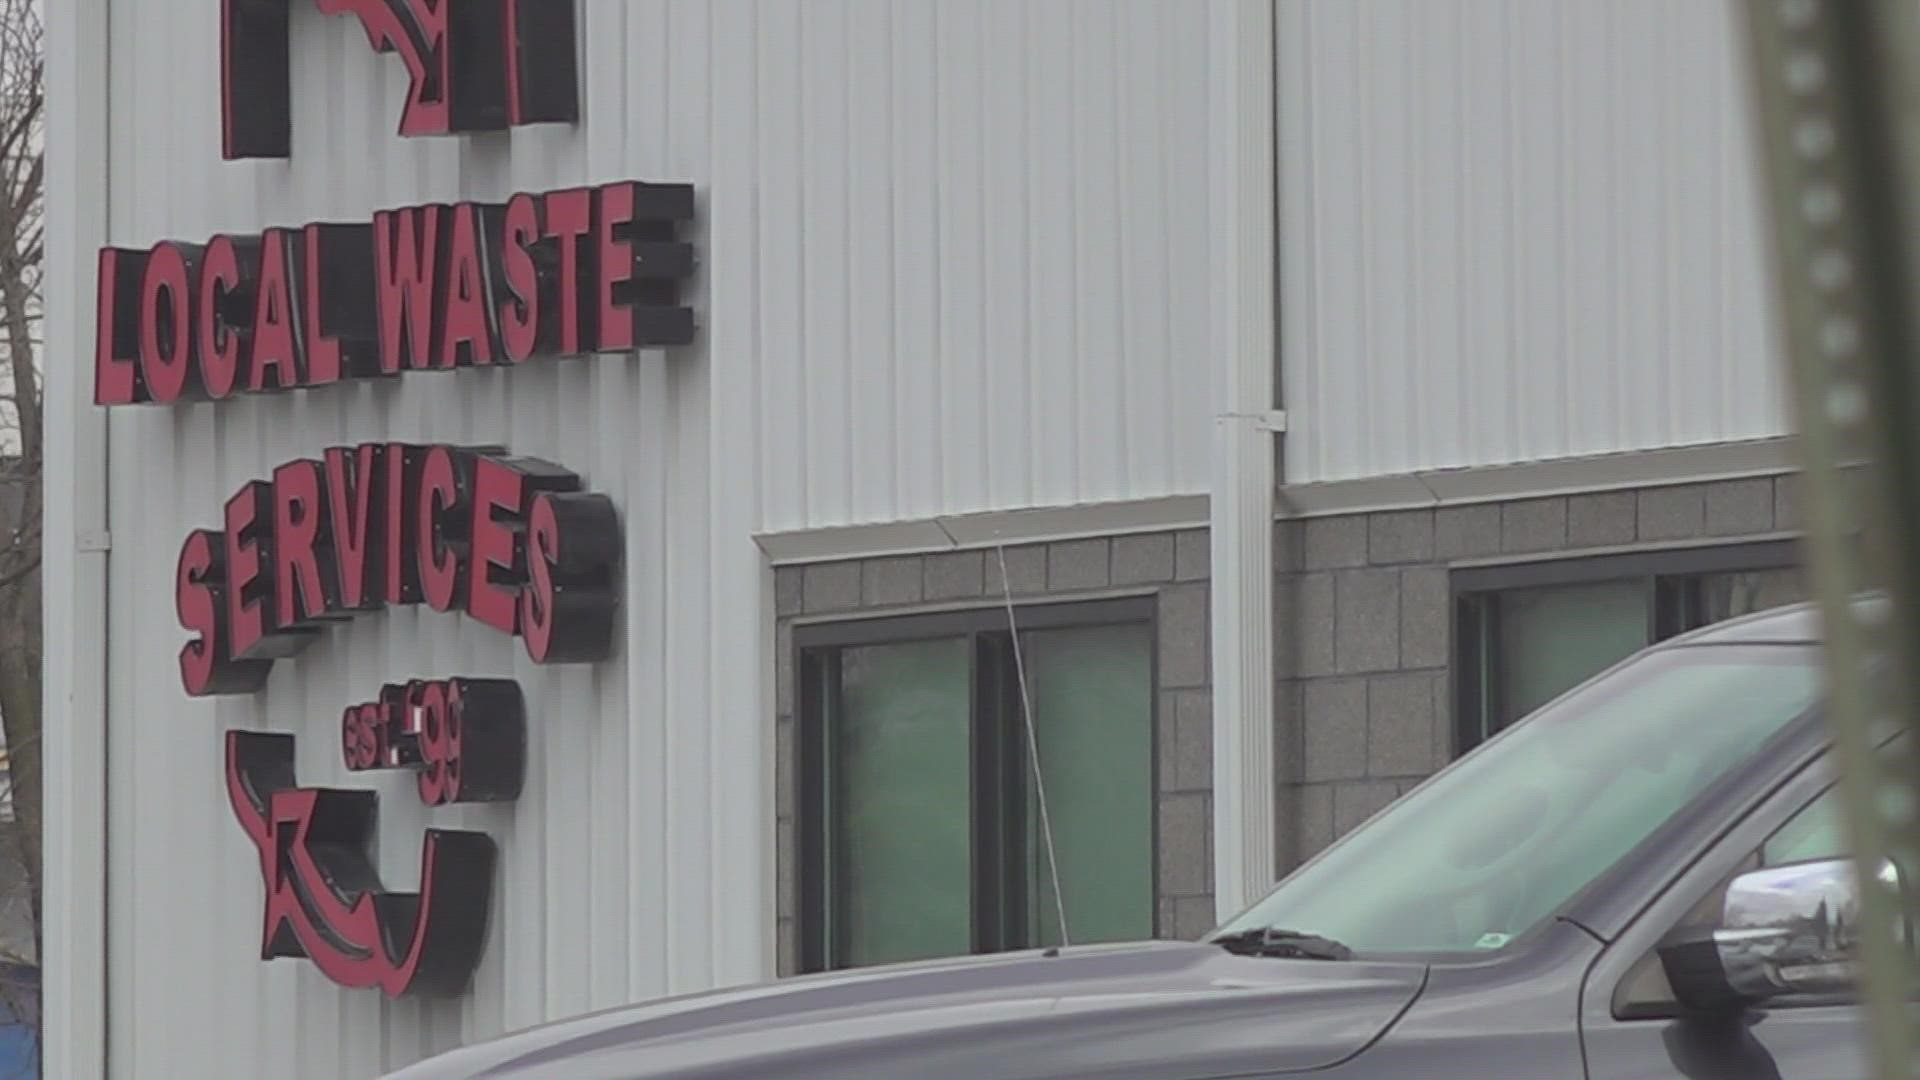 Local Waste Services says “the individual is no longer an employee.”